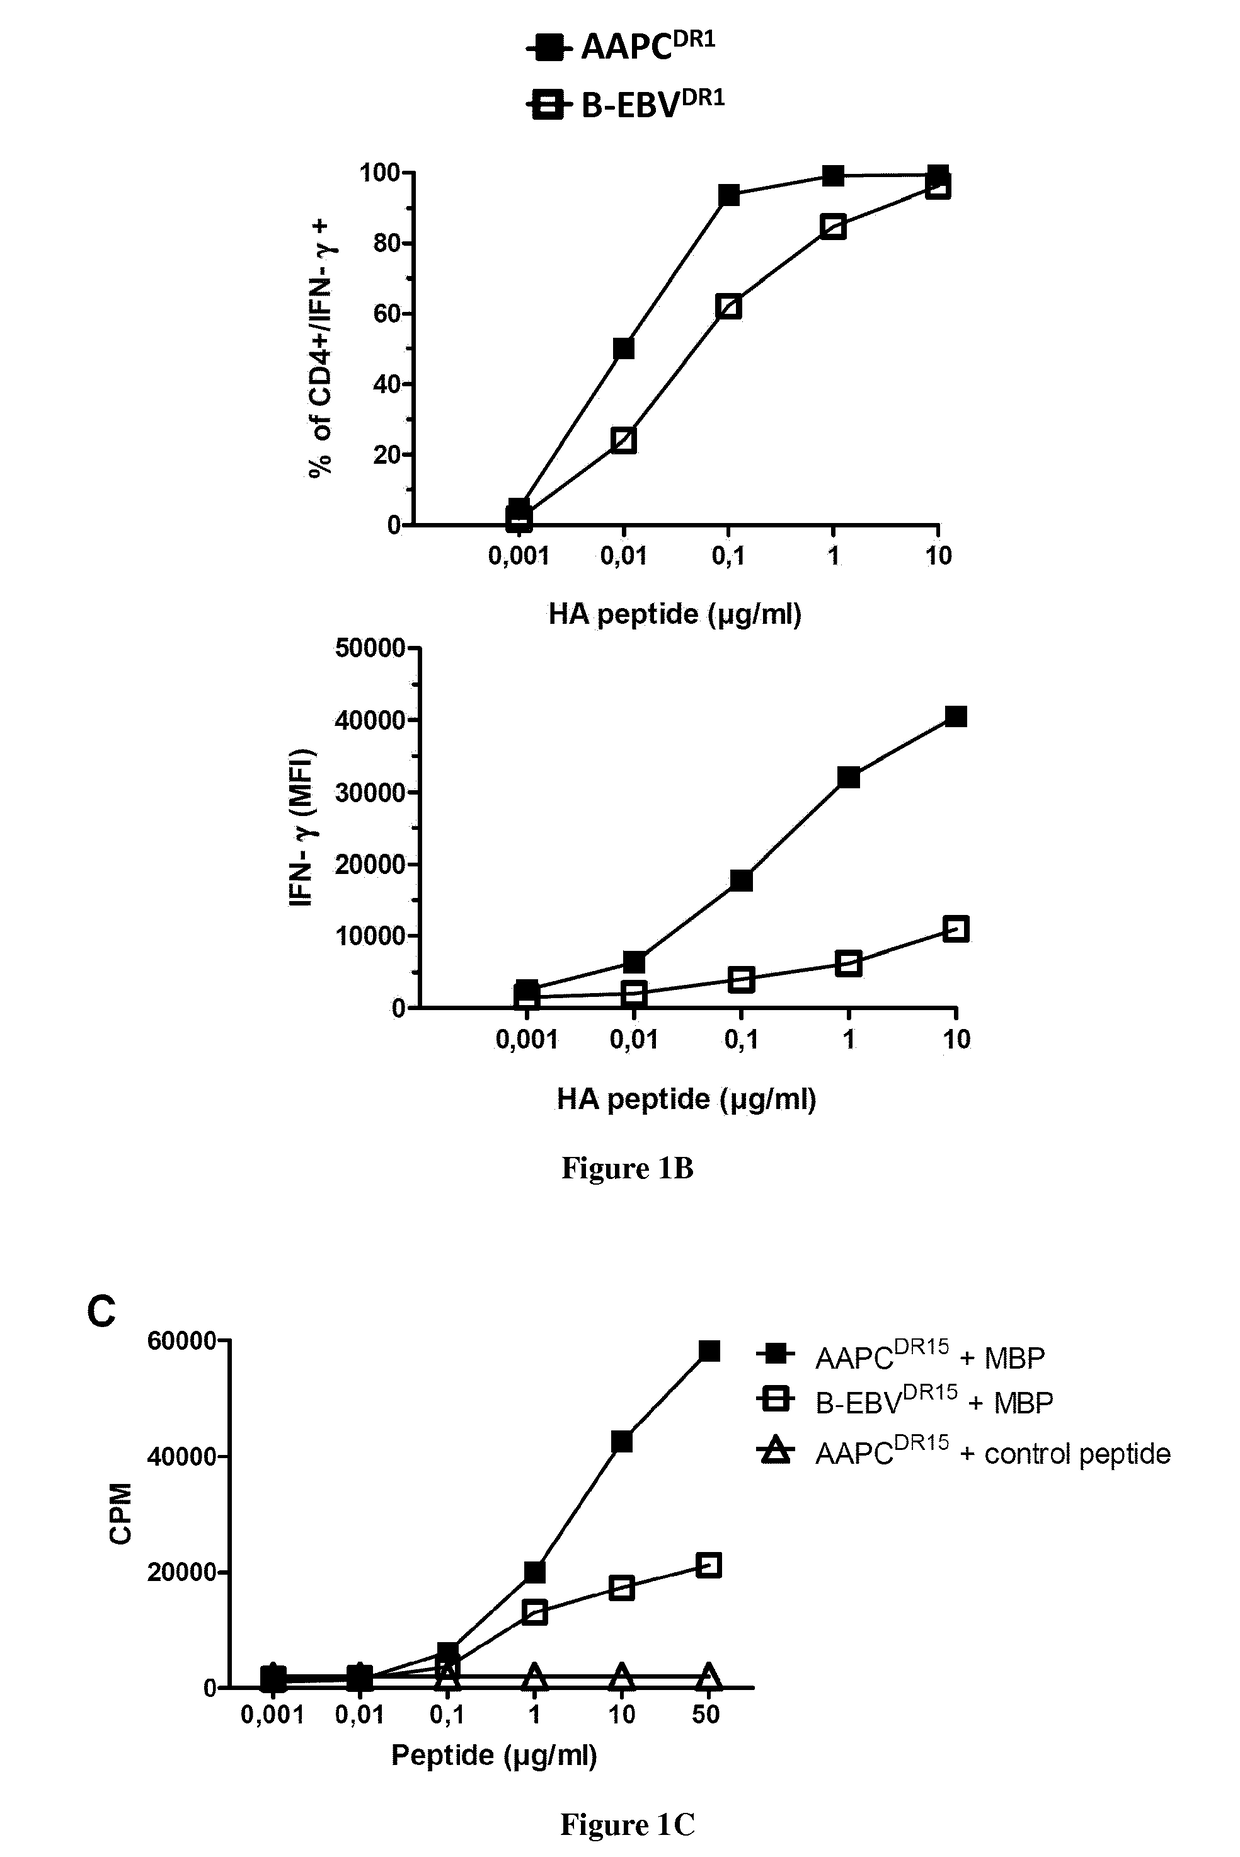 Method of amplifying a population of antigen-specific memory cd4+ t cells using artificial presenting cells expressing HLA class ii molecules